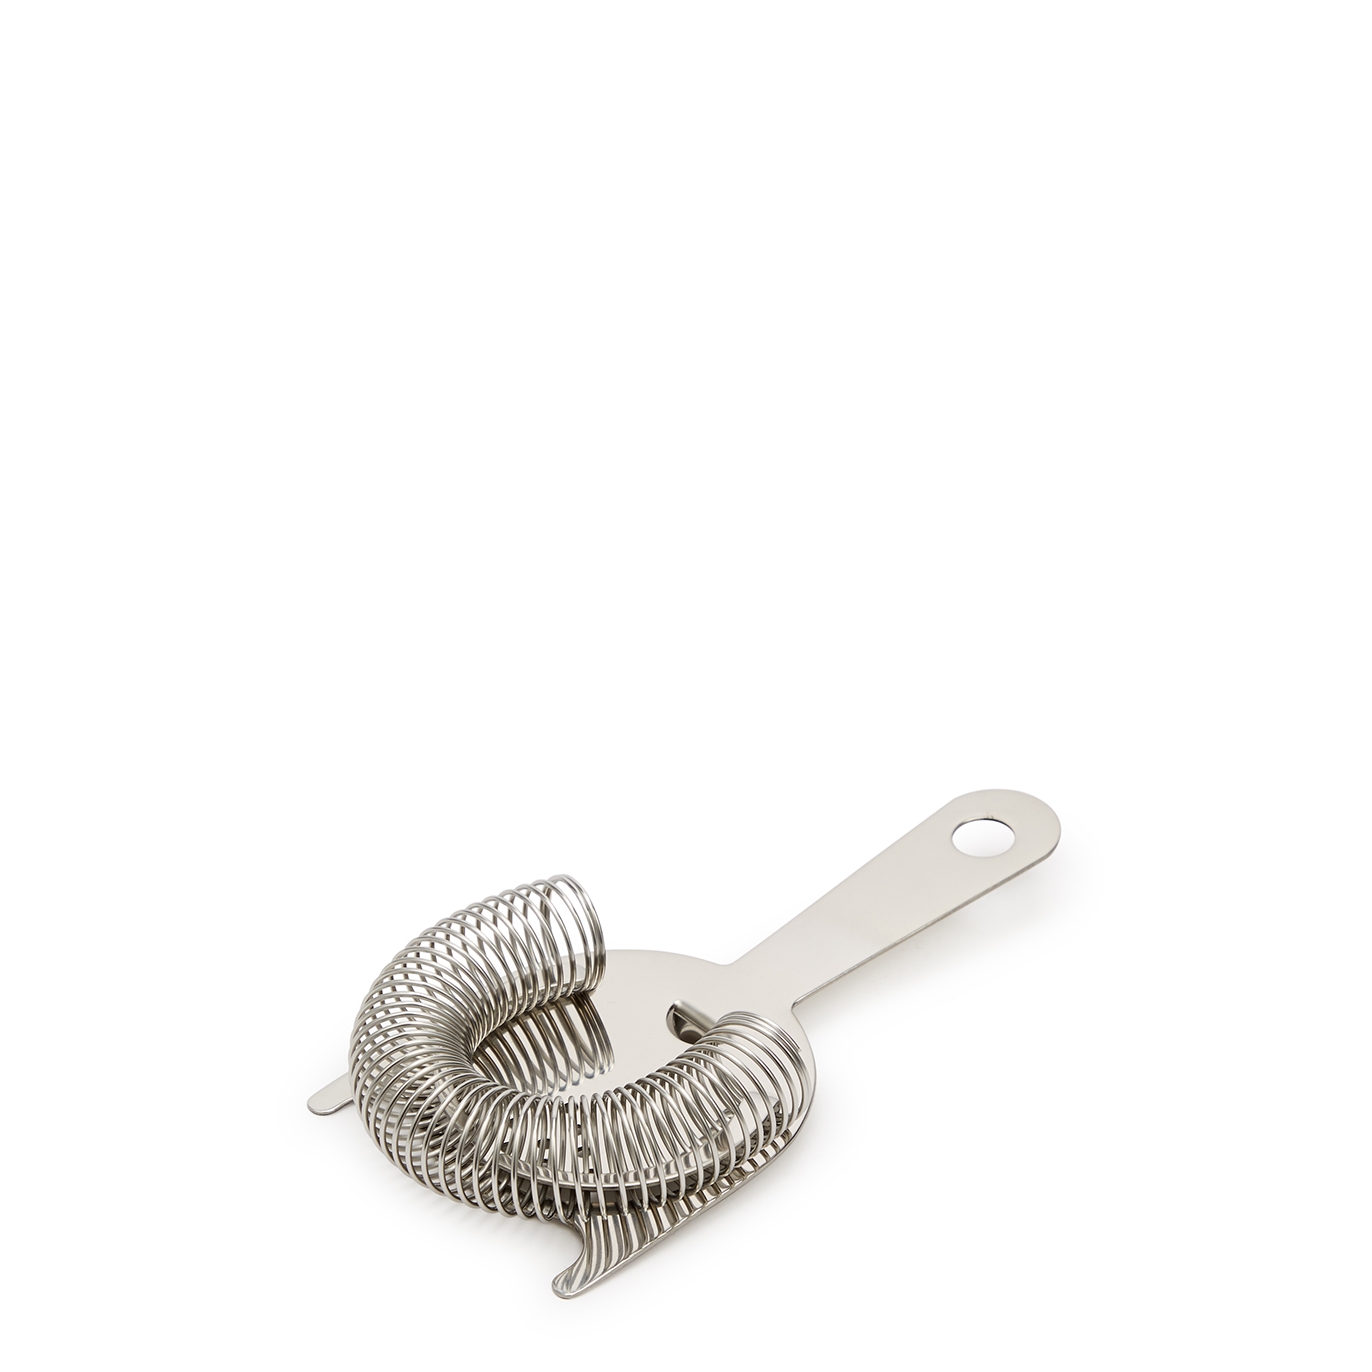 Beaumont Professional Two Prong Cocktail Strainer